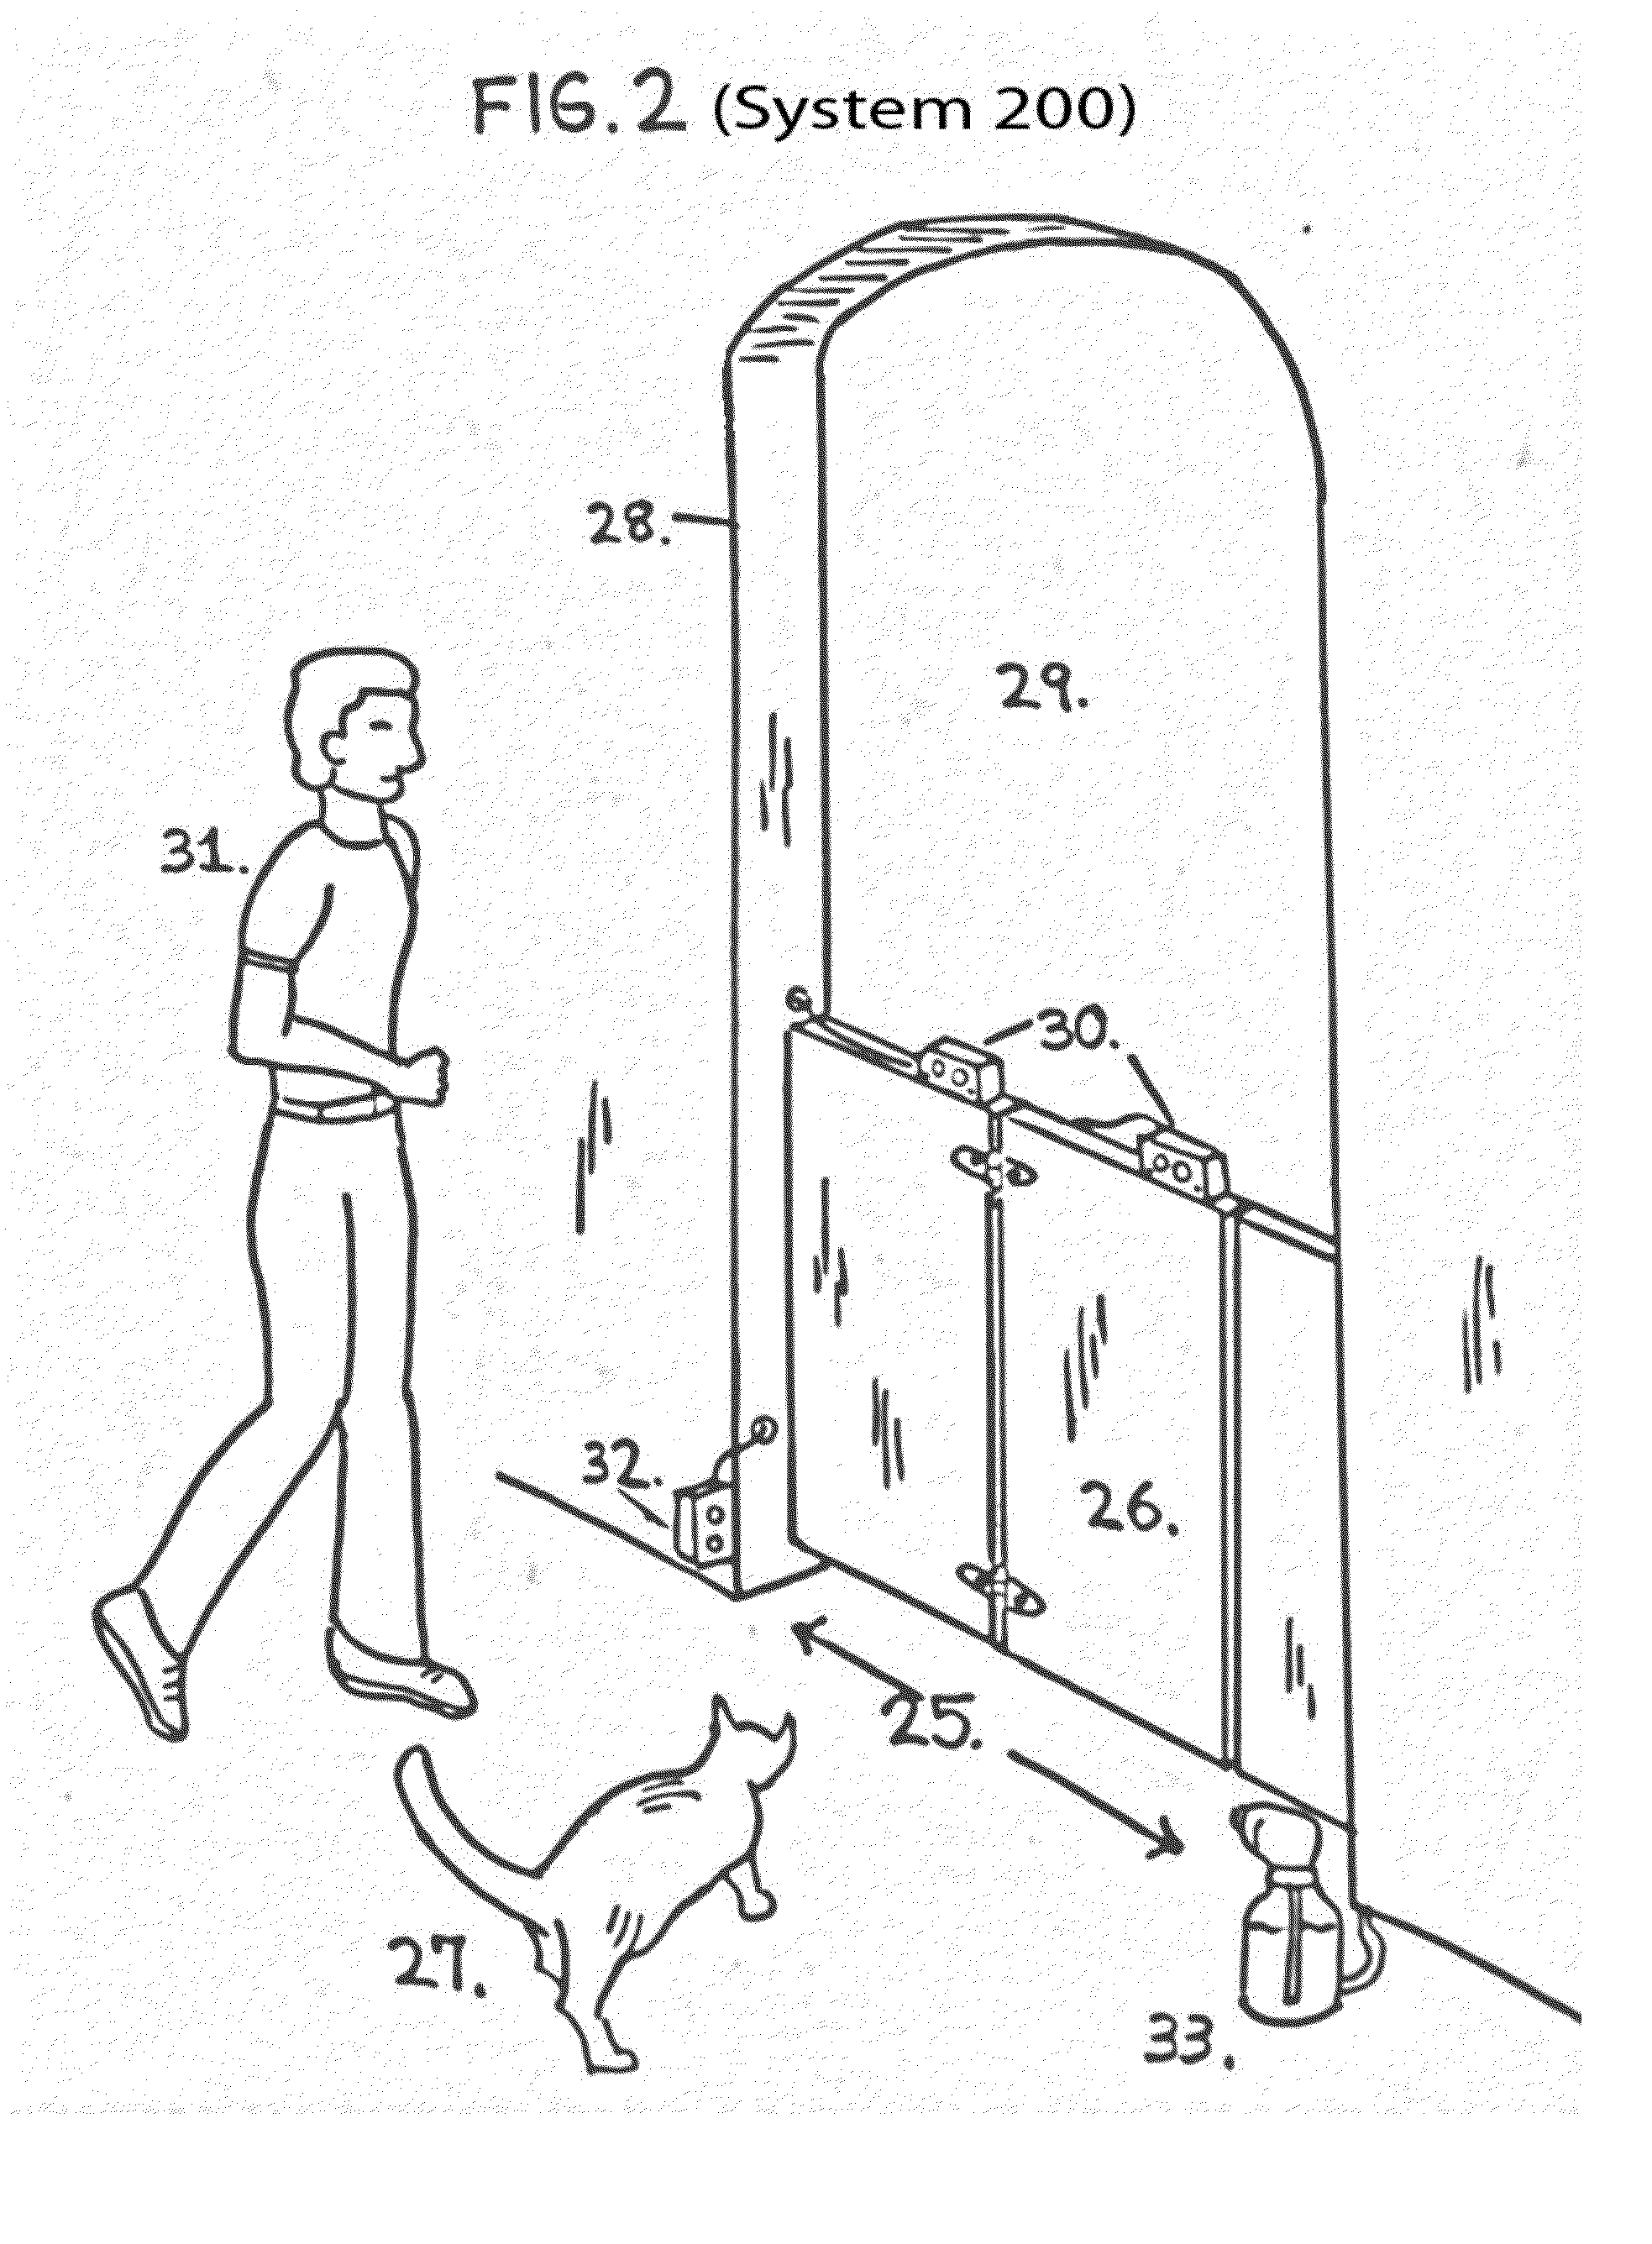 Human sensing pet deterrent system for protecting an indoor area